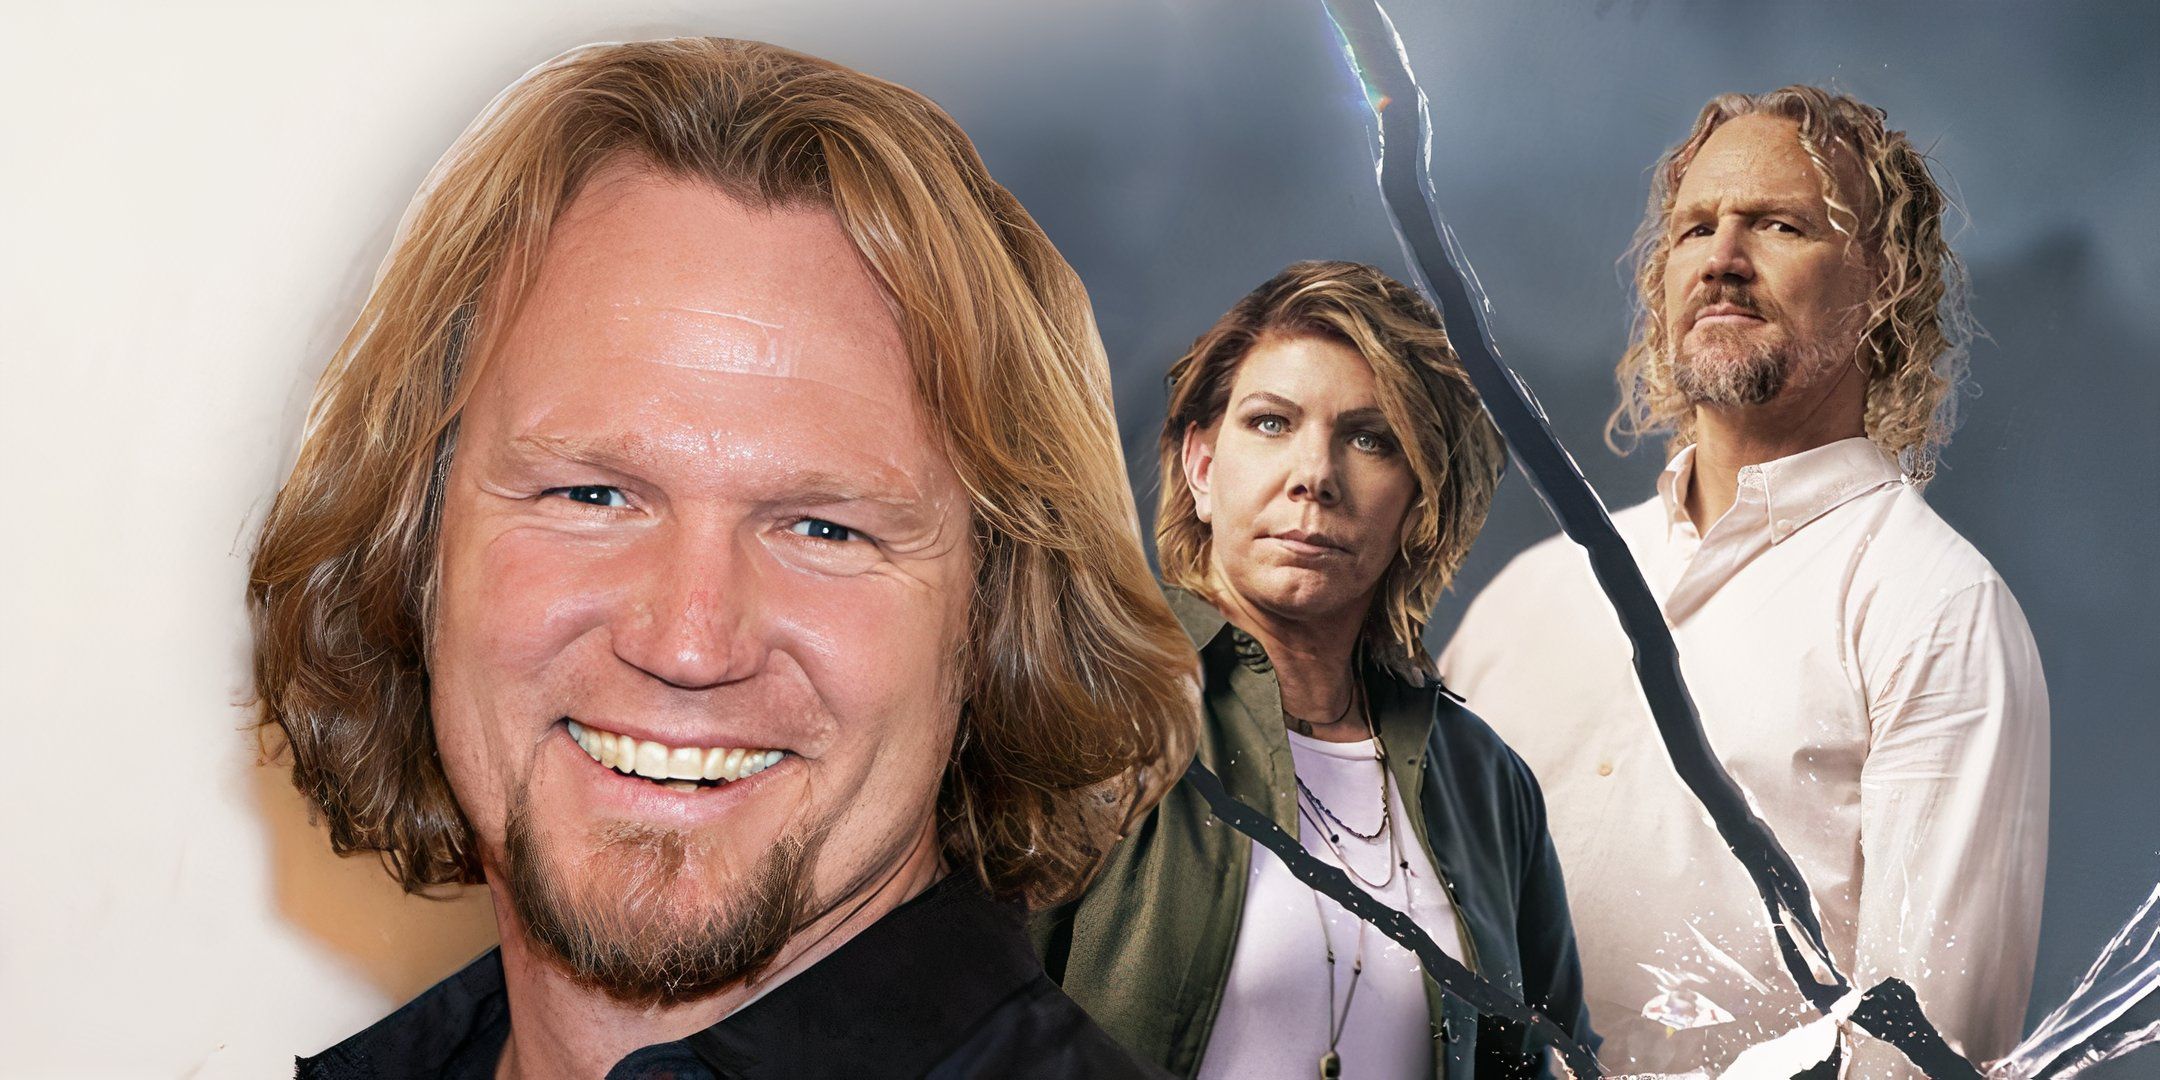 Sister Wives: The Truth About Kody Brown And Meri's Messy Relationship